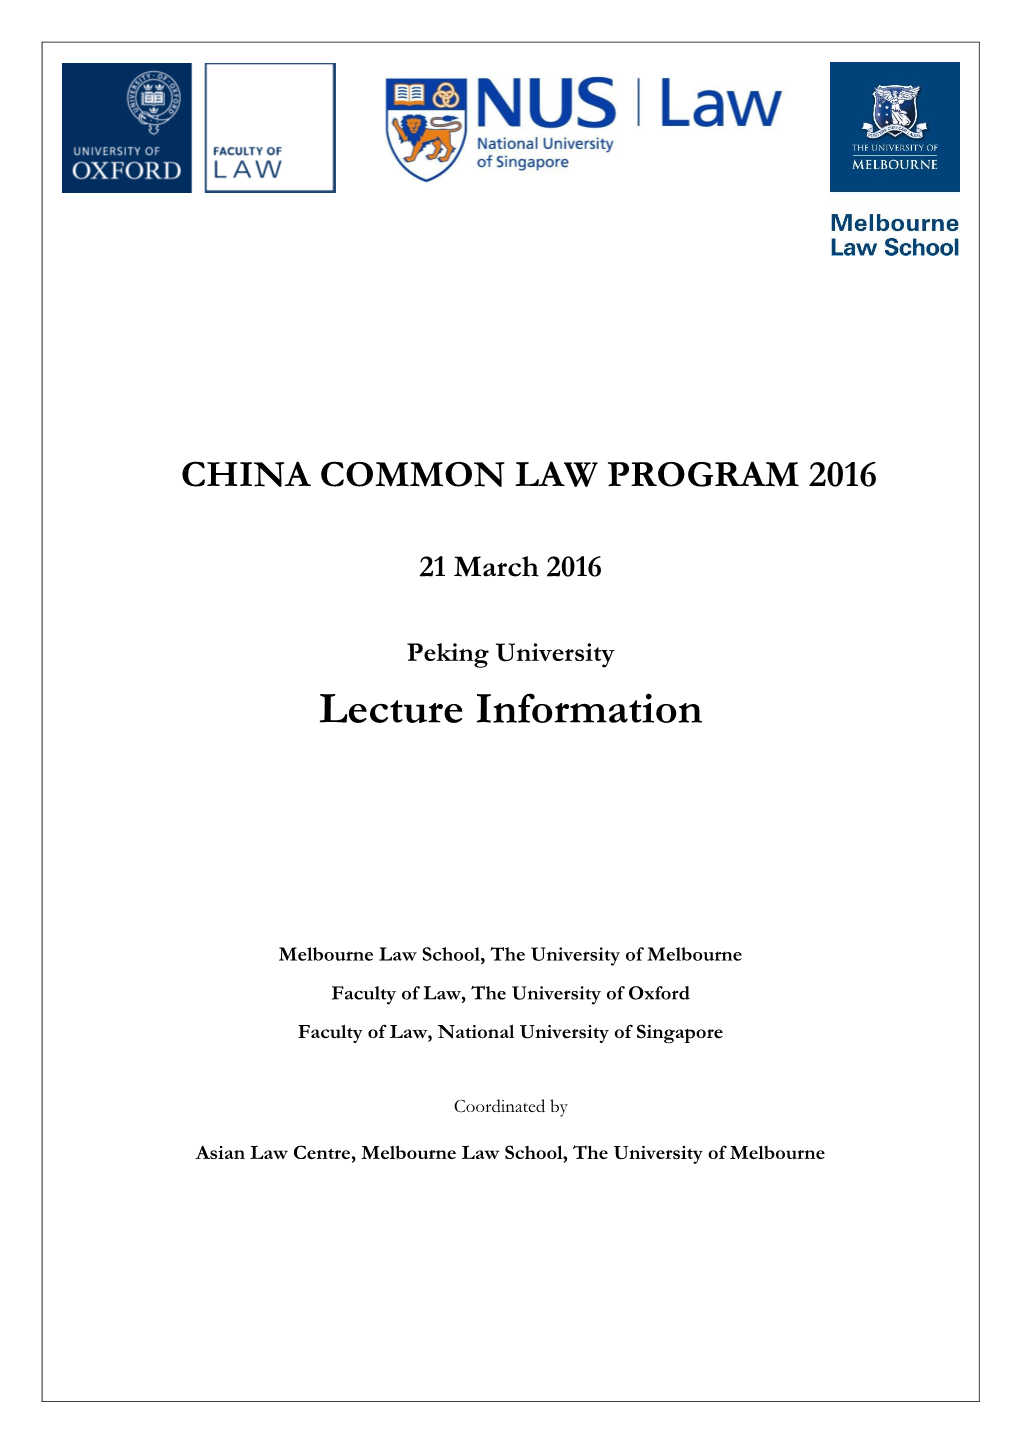 CHINA COMMON LAW PROGRAM 2016 21 March 2016 Peking University Lecture Information